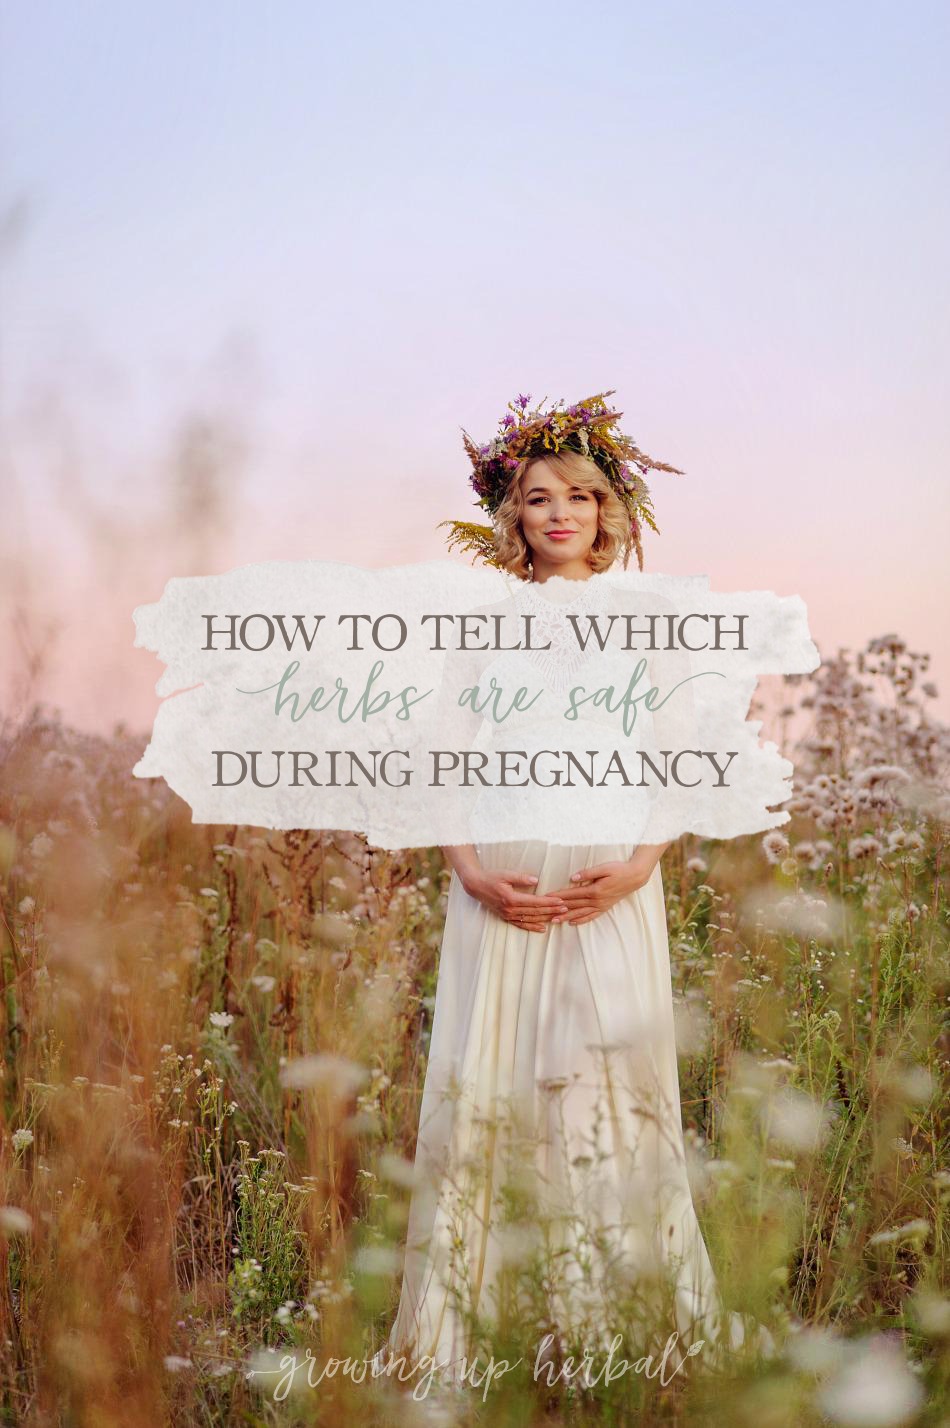 How To Tell Which Herbs Are Safe During Pregnancy (And Which Aren't) | Growing Up Herbal | Pregnant? Are you wondering how to tell which herbs are safe during pregnancy (and which aren't)?